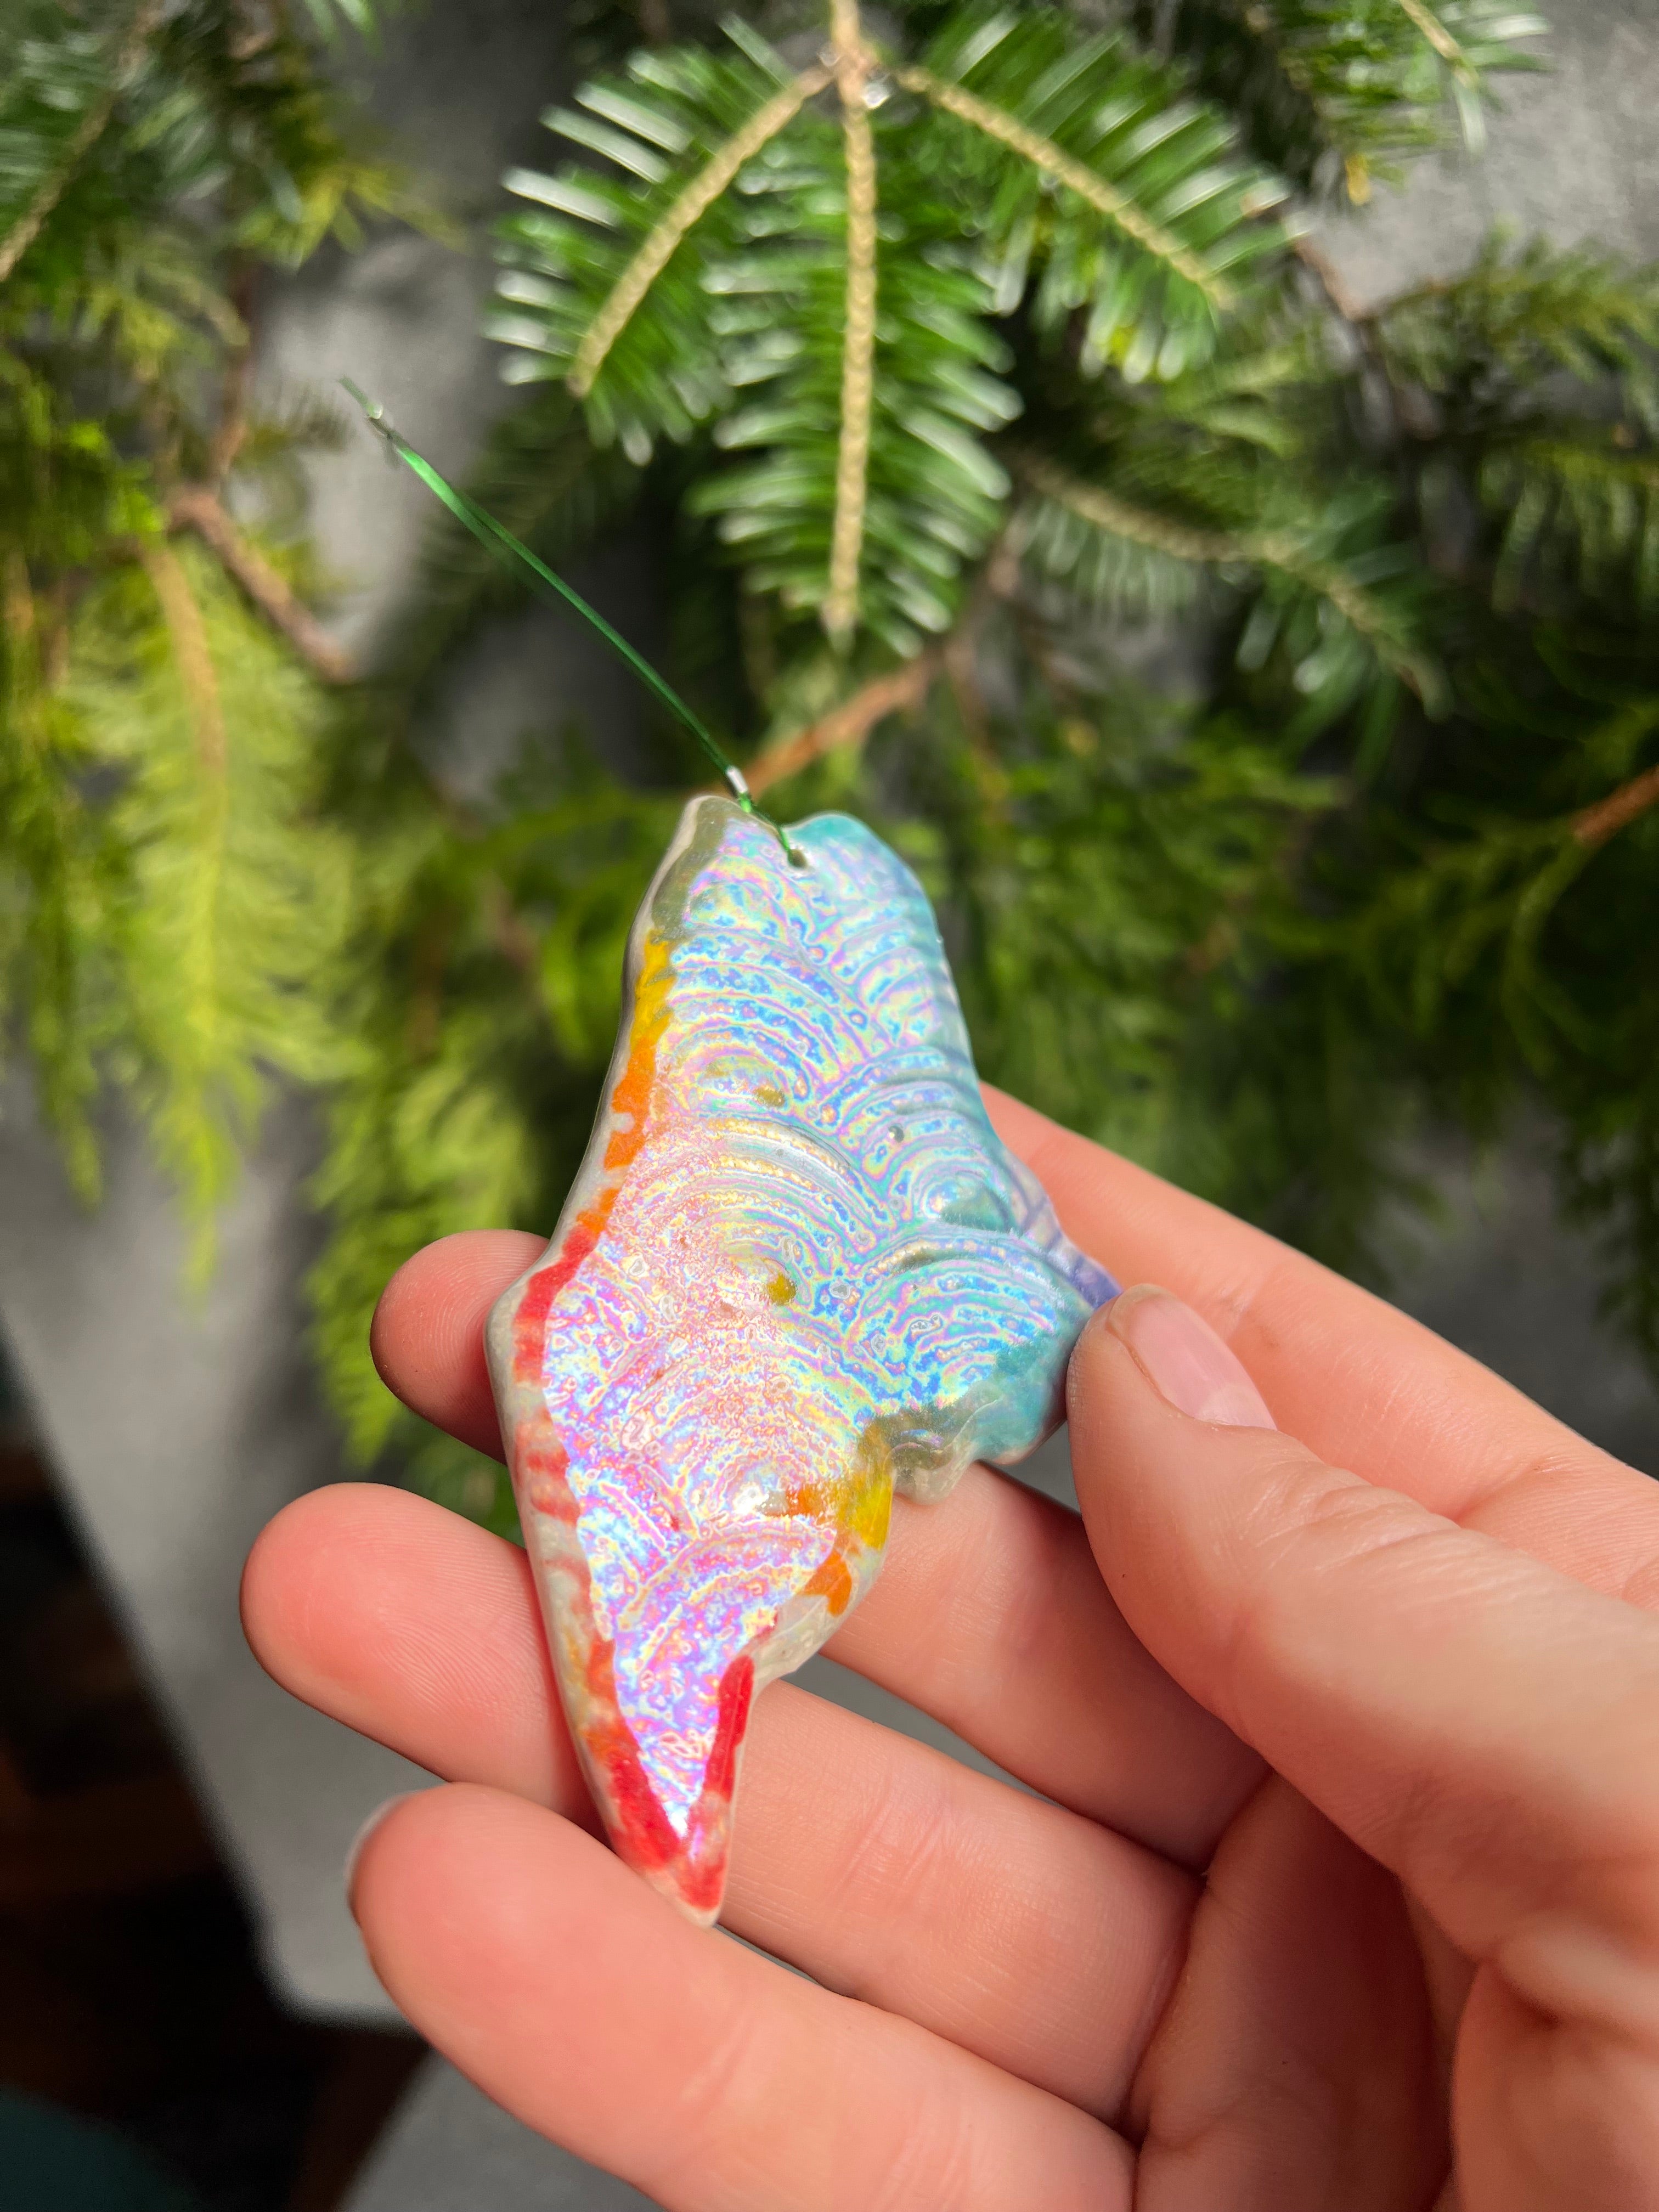 A state of Maine ornament with a rainbow of painted vertical stripes and a rainbow textured surface is held at an angle in front of cedar and balsam branches to show off the rainbow iridescent sheen on the surface.